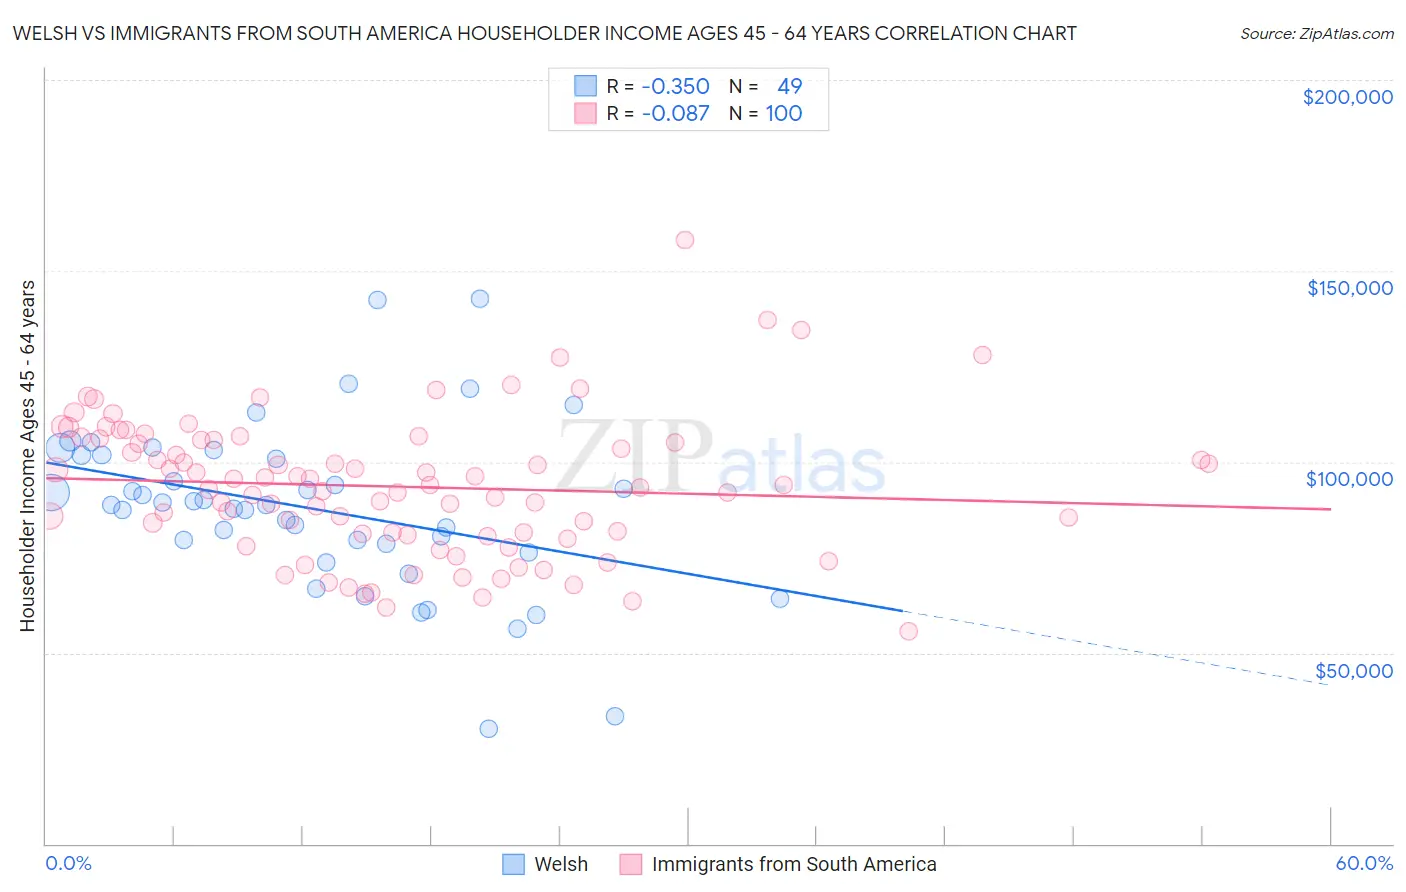 Welsh vs Immigrants from South America Householder Income Ages 45 - 64 years